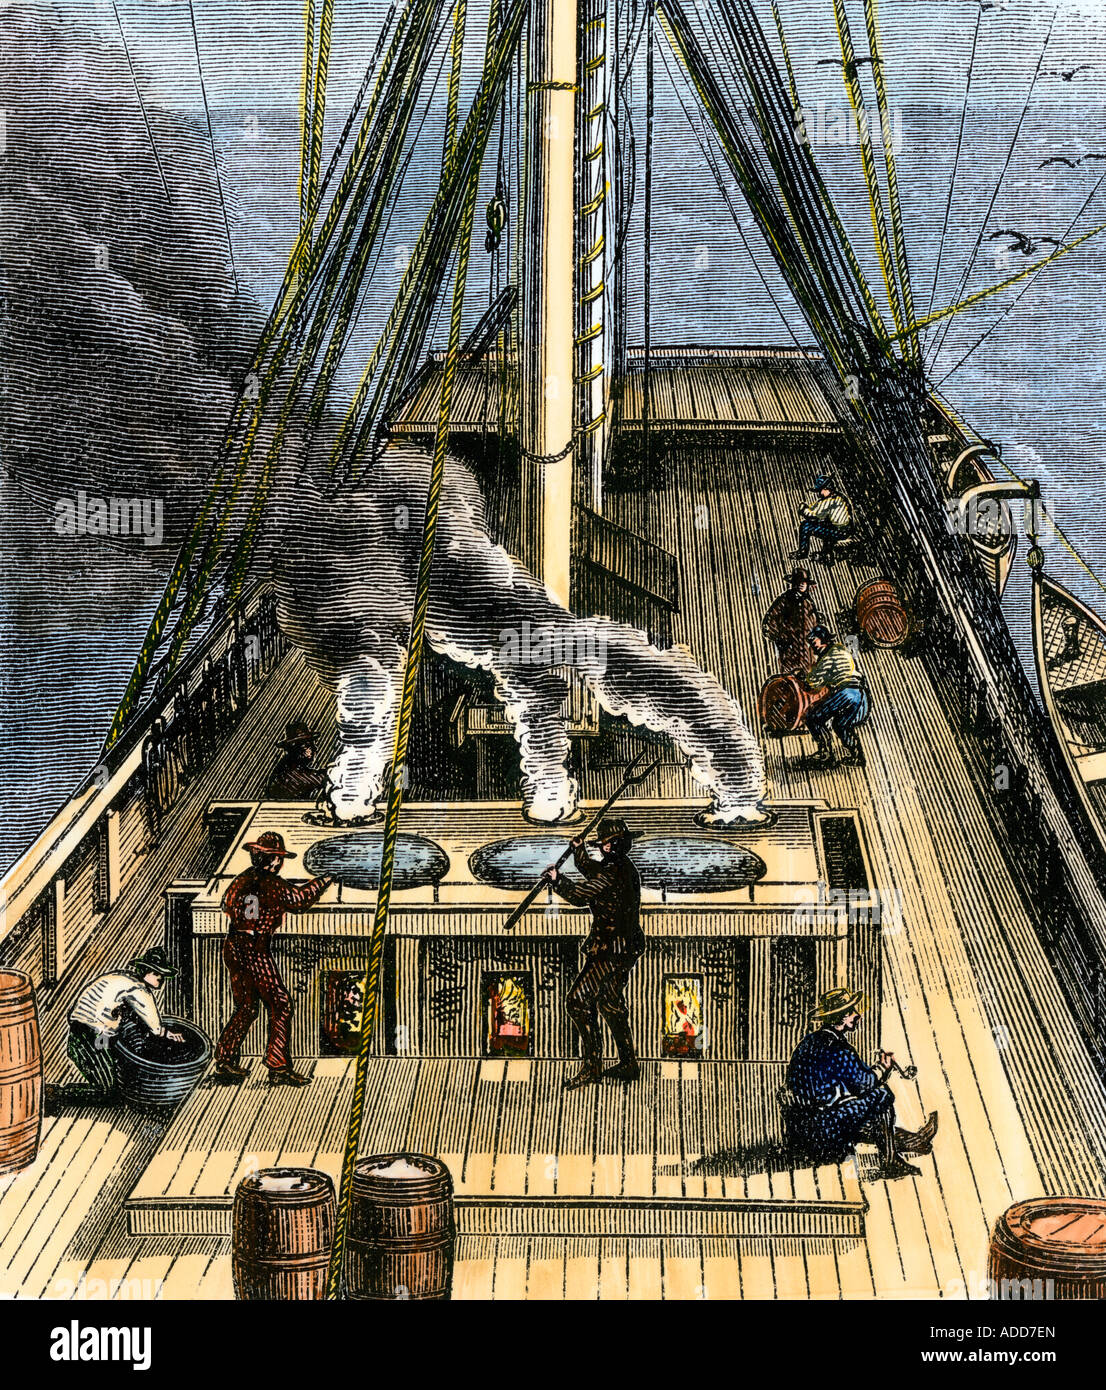 Trying-out, or boiling, whale bubber for oil on a whaling ship 1800s. Hand-colored woodcut Stock Photo